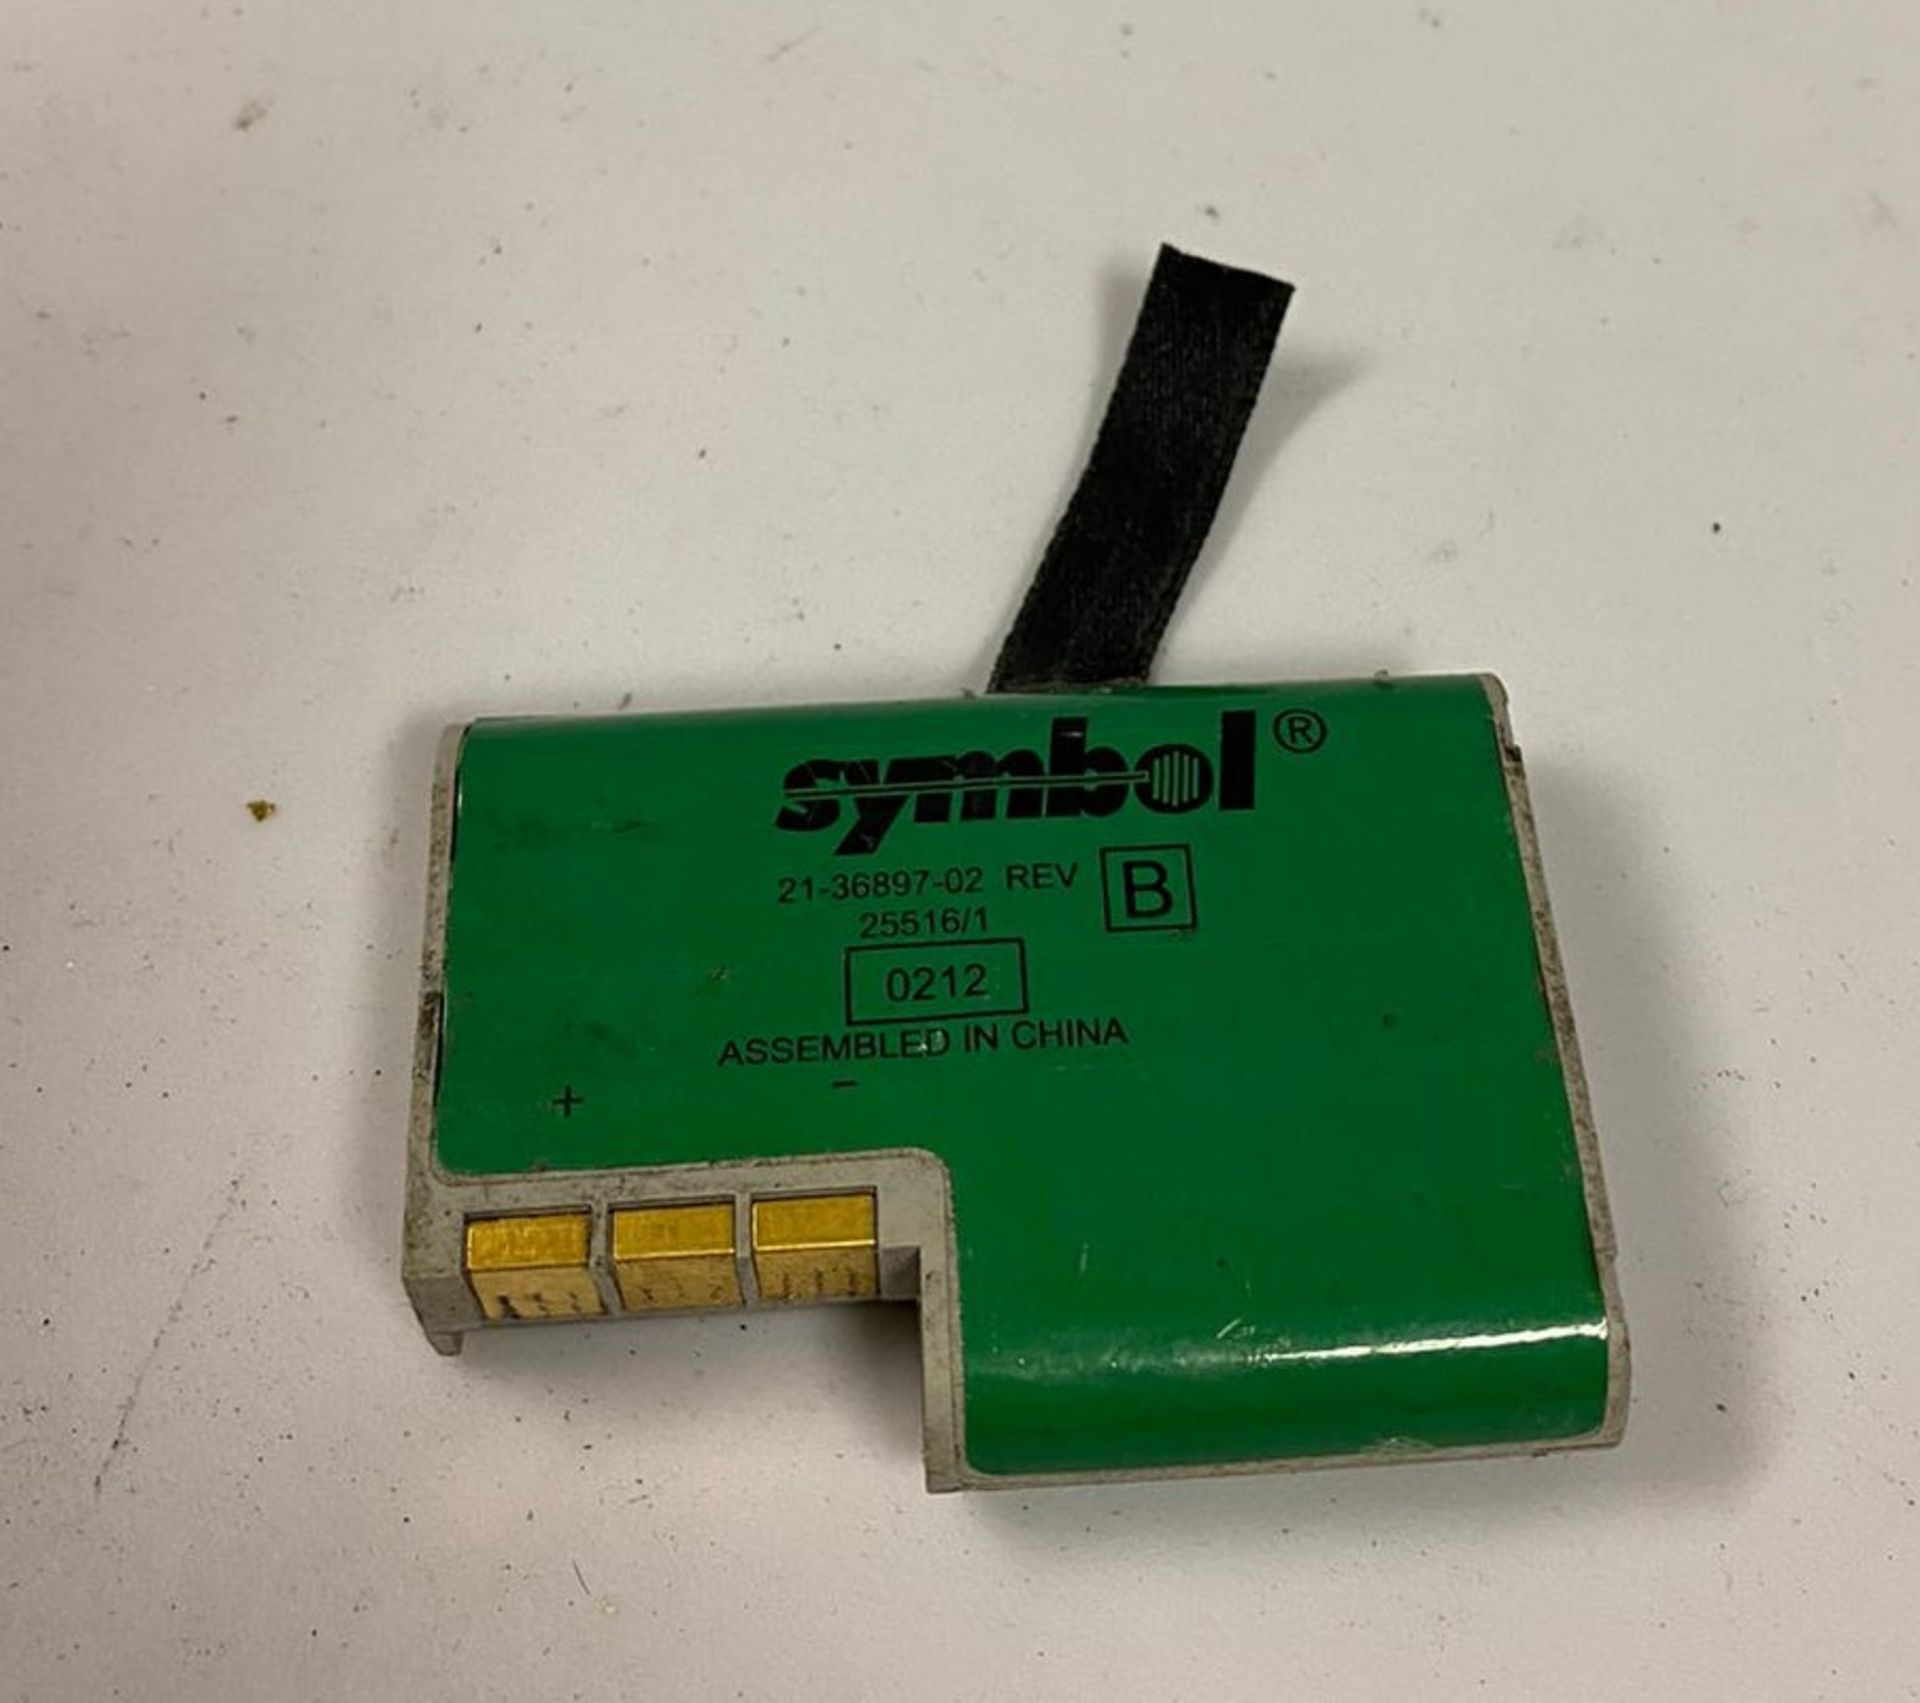 20 x Symbol 21-36897-02 Rechargeable Batteries 6.0 V 750mAh - Ref:21-36897-02 - Used Condition - - Image 2 of 5